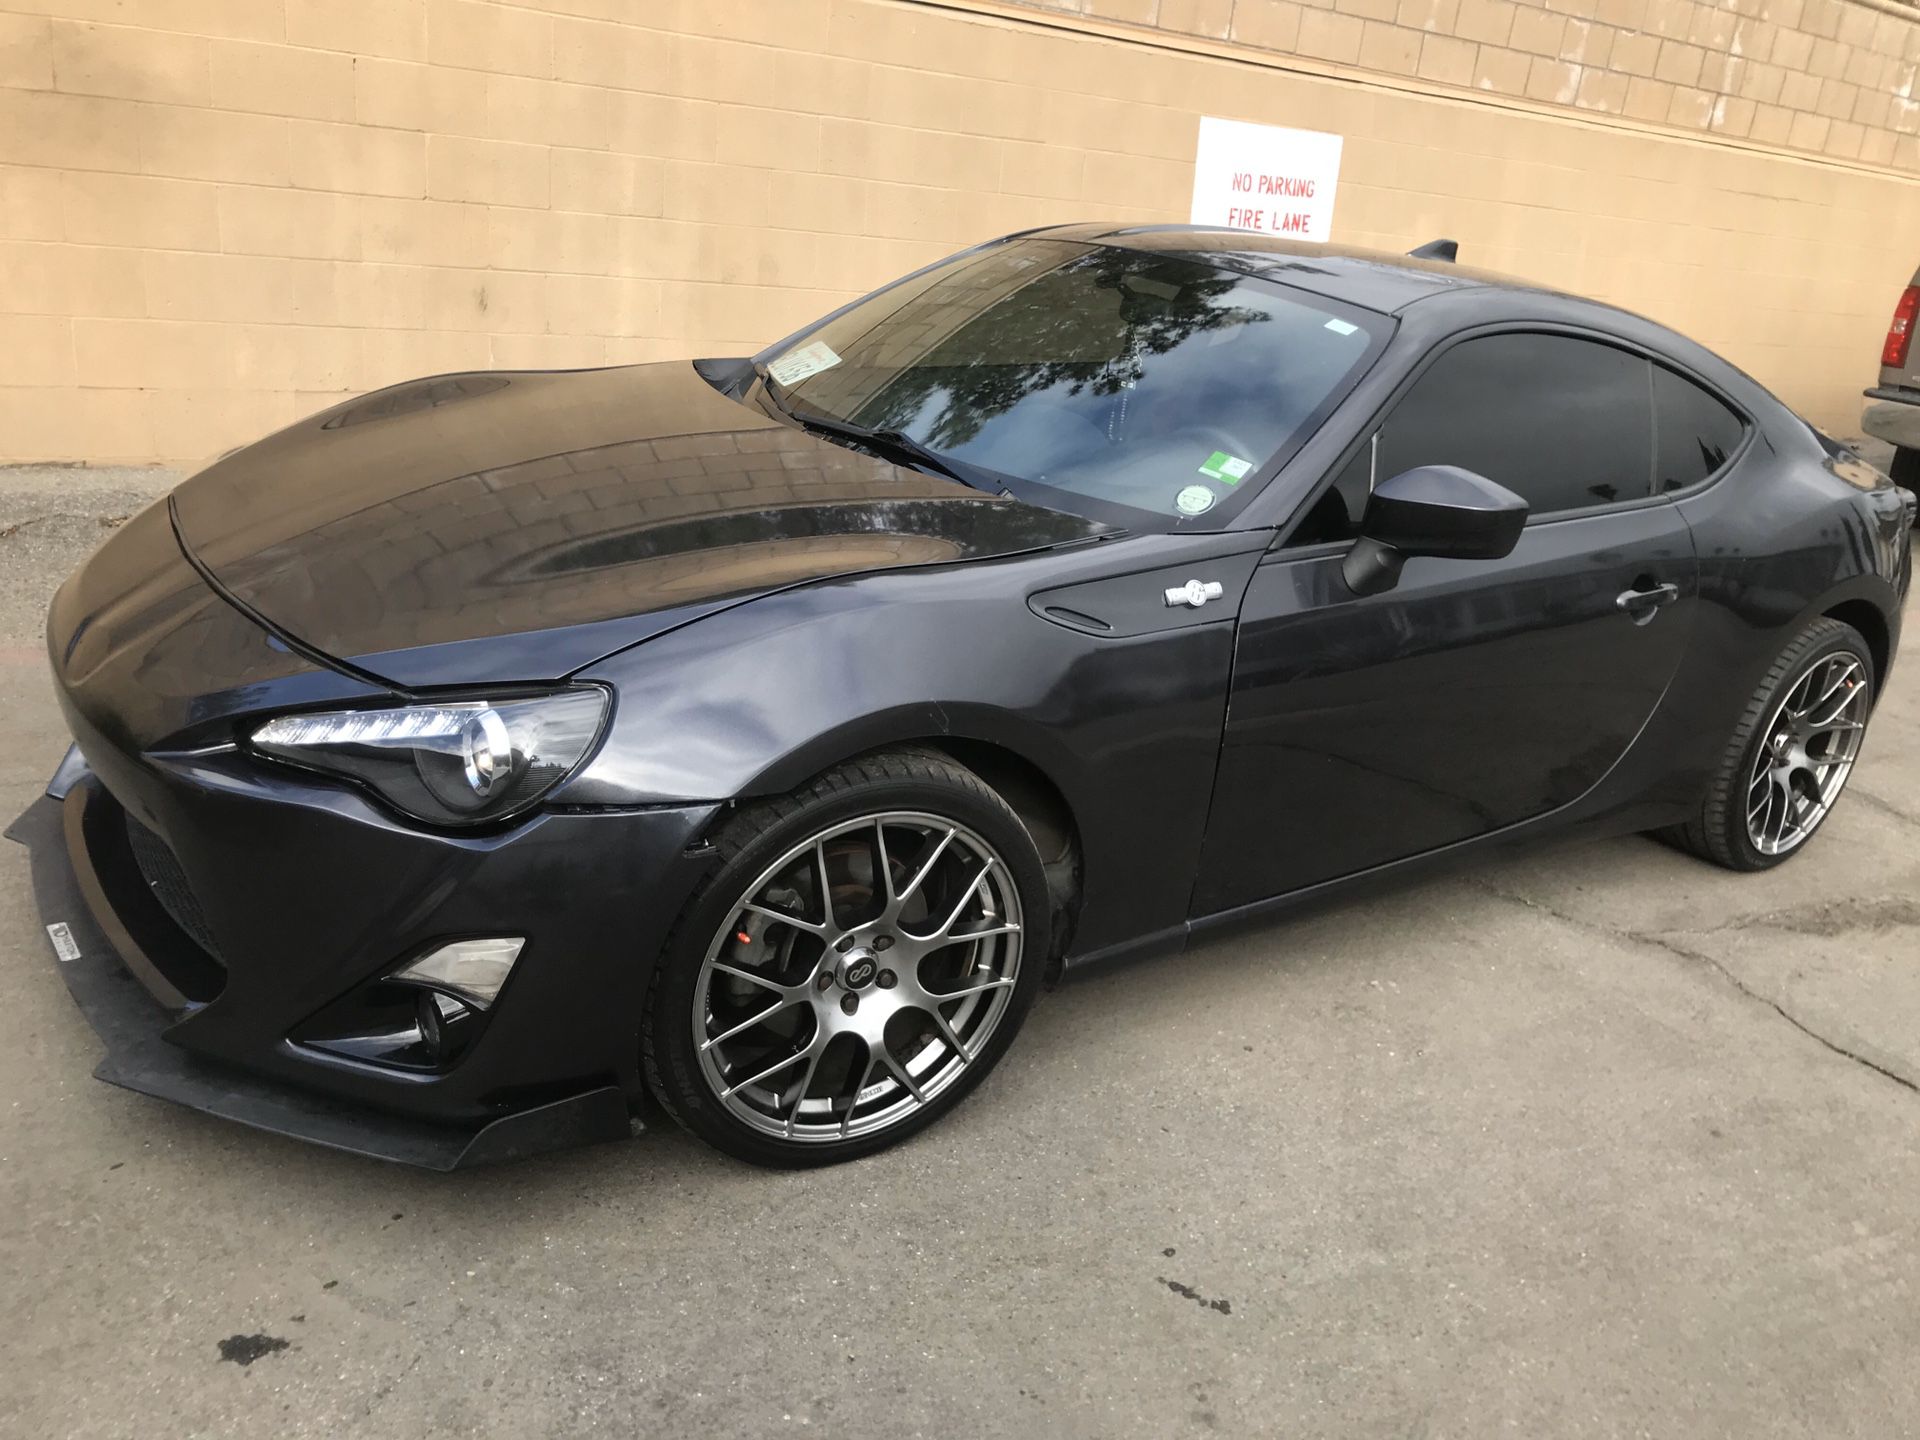 Frs